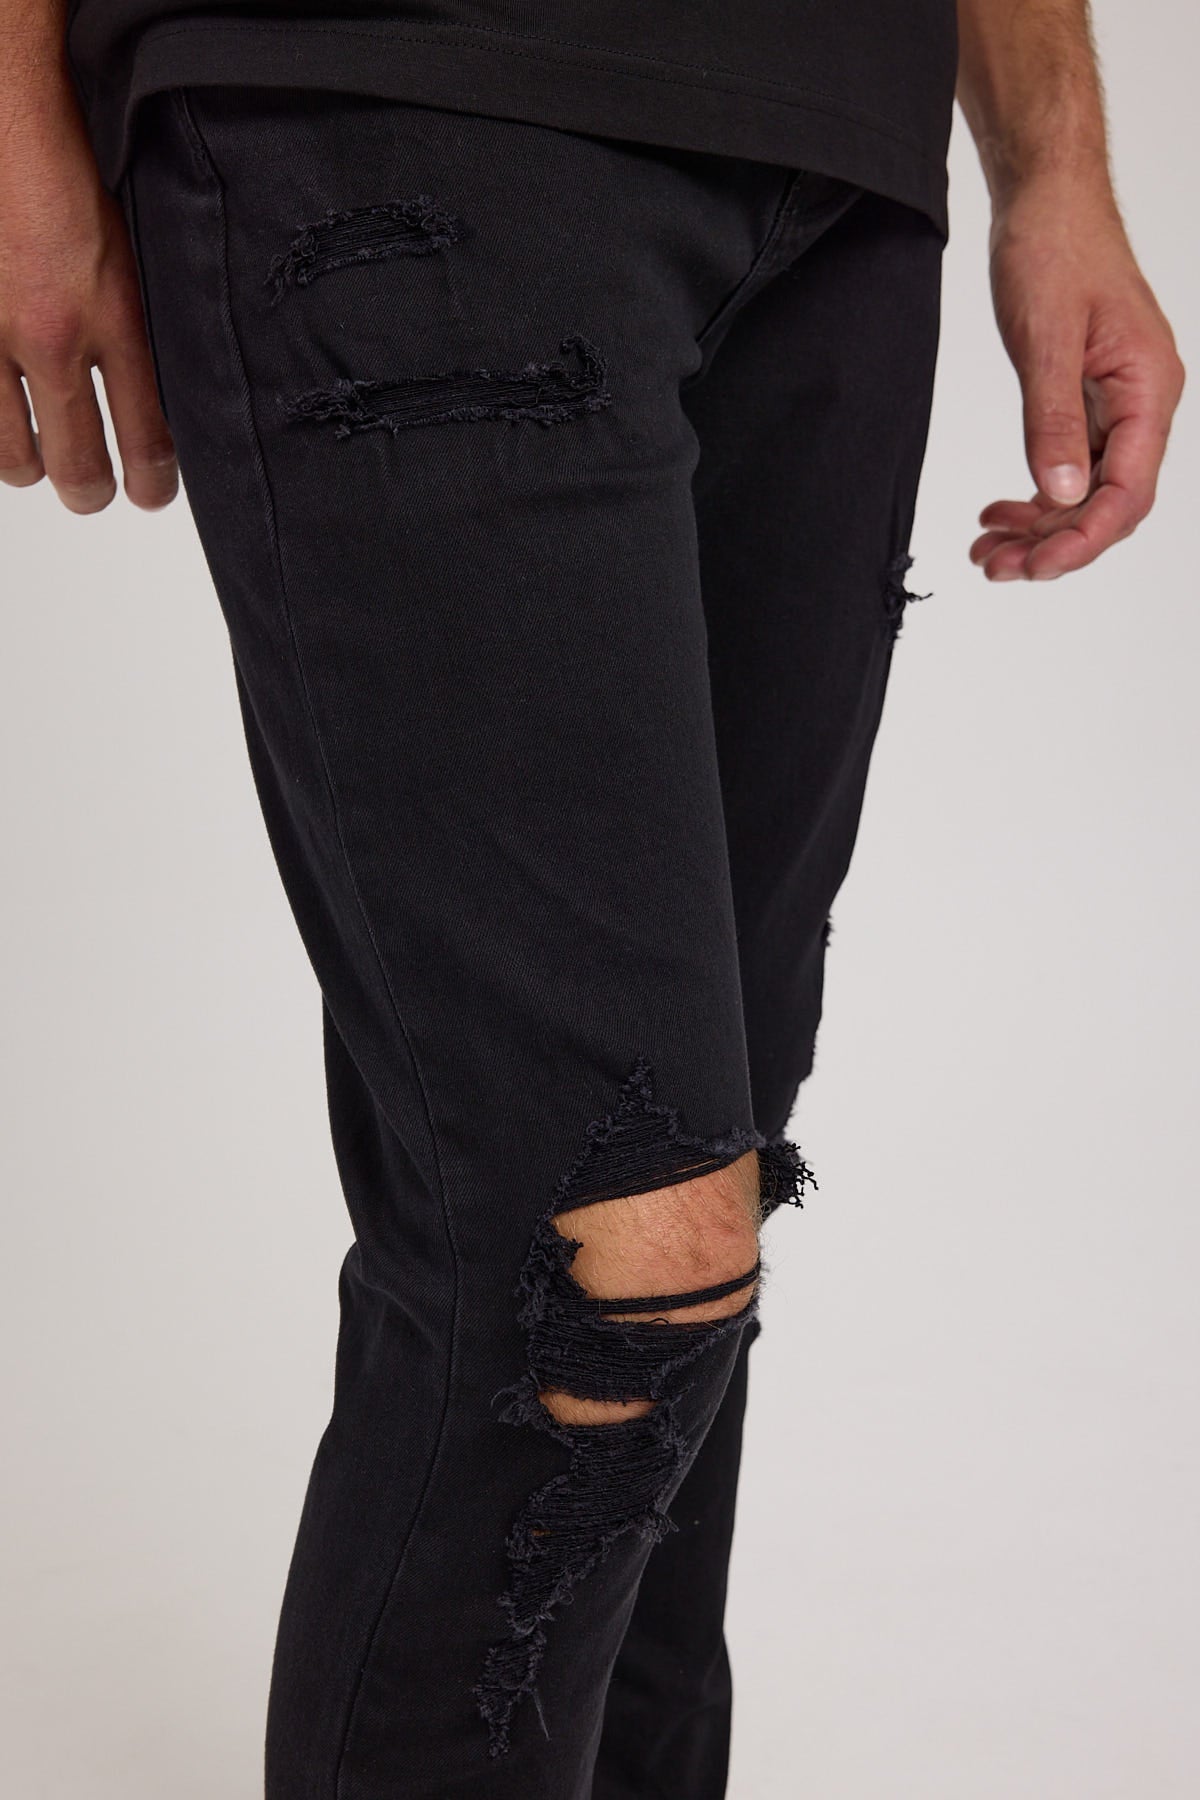 Abrand A Dropped Slim Turn Up Jean Rogue Black